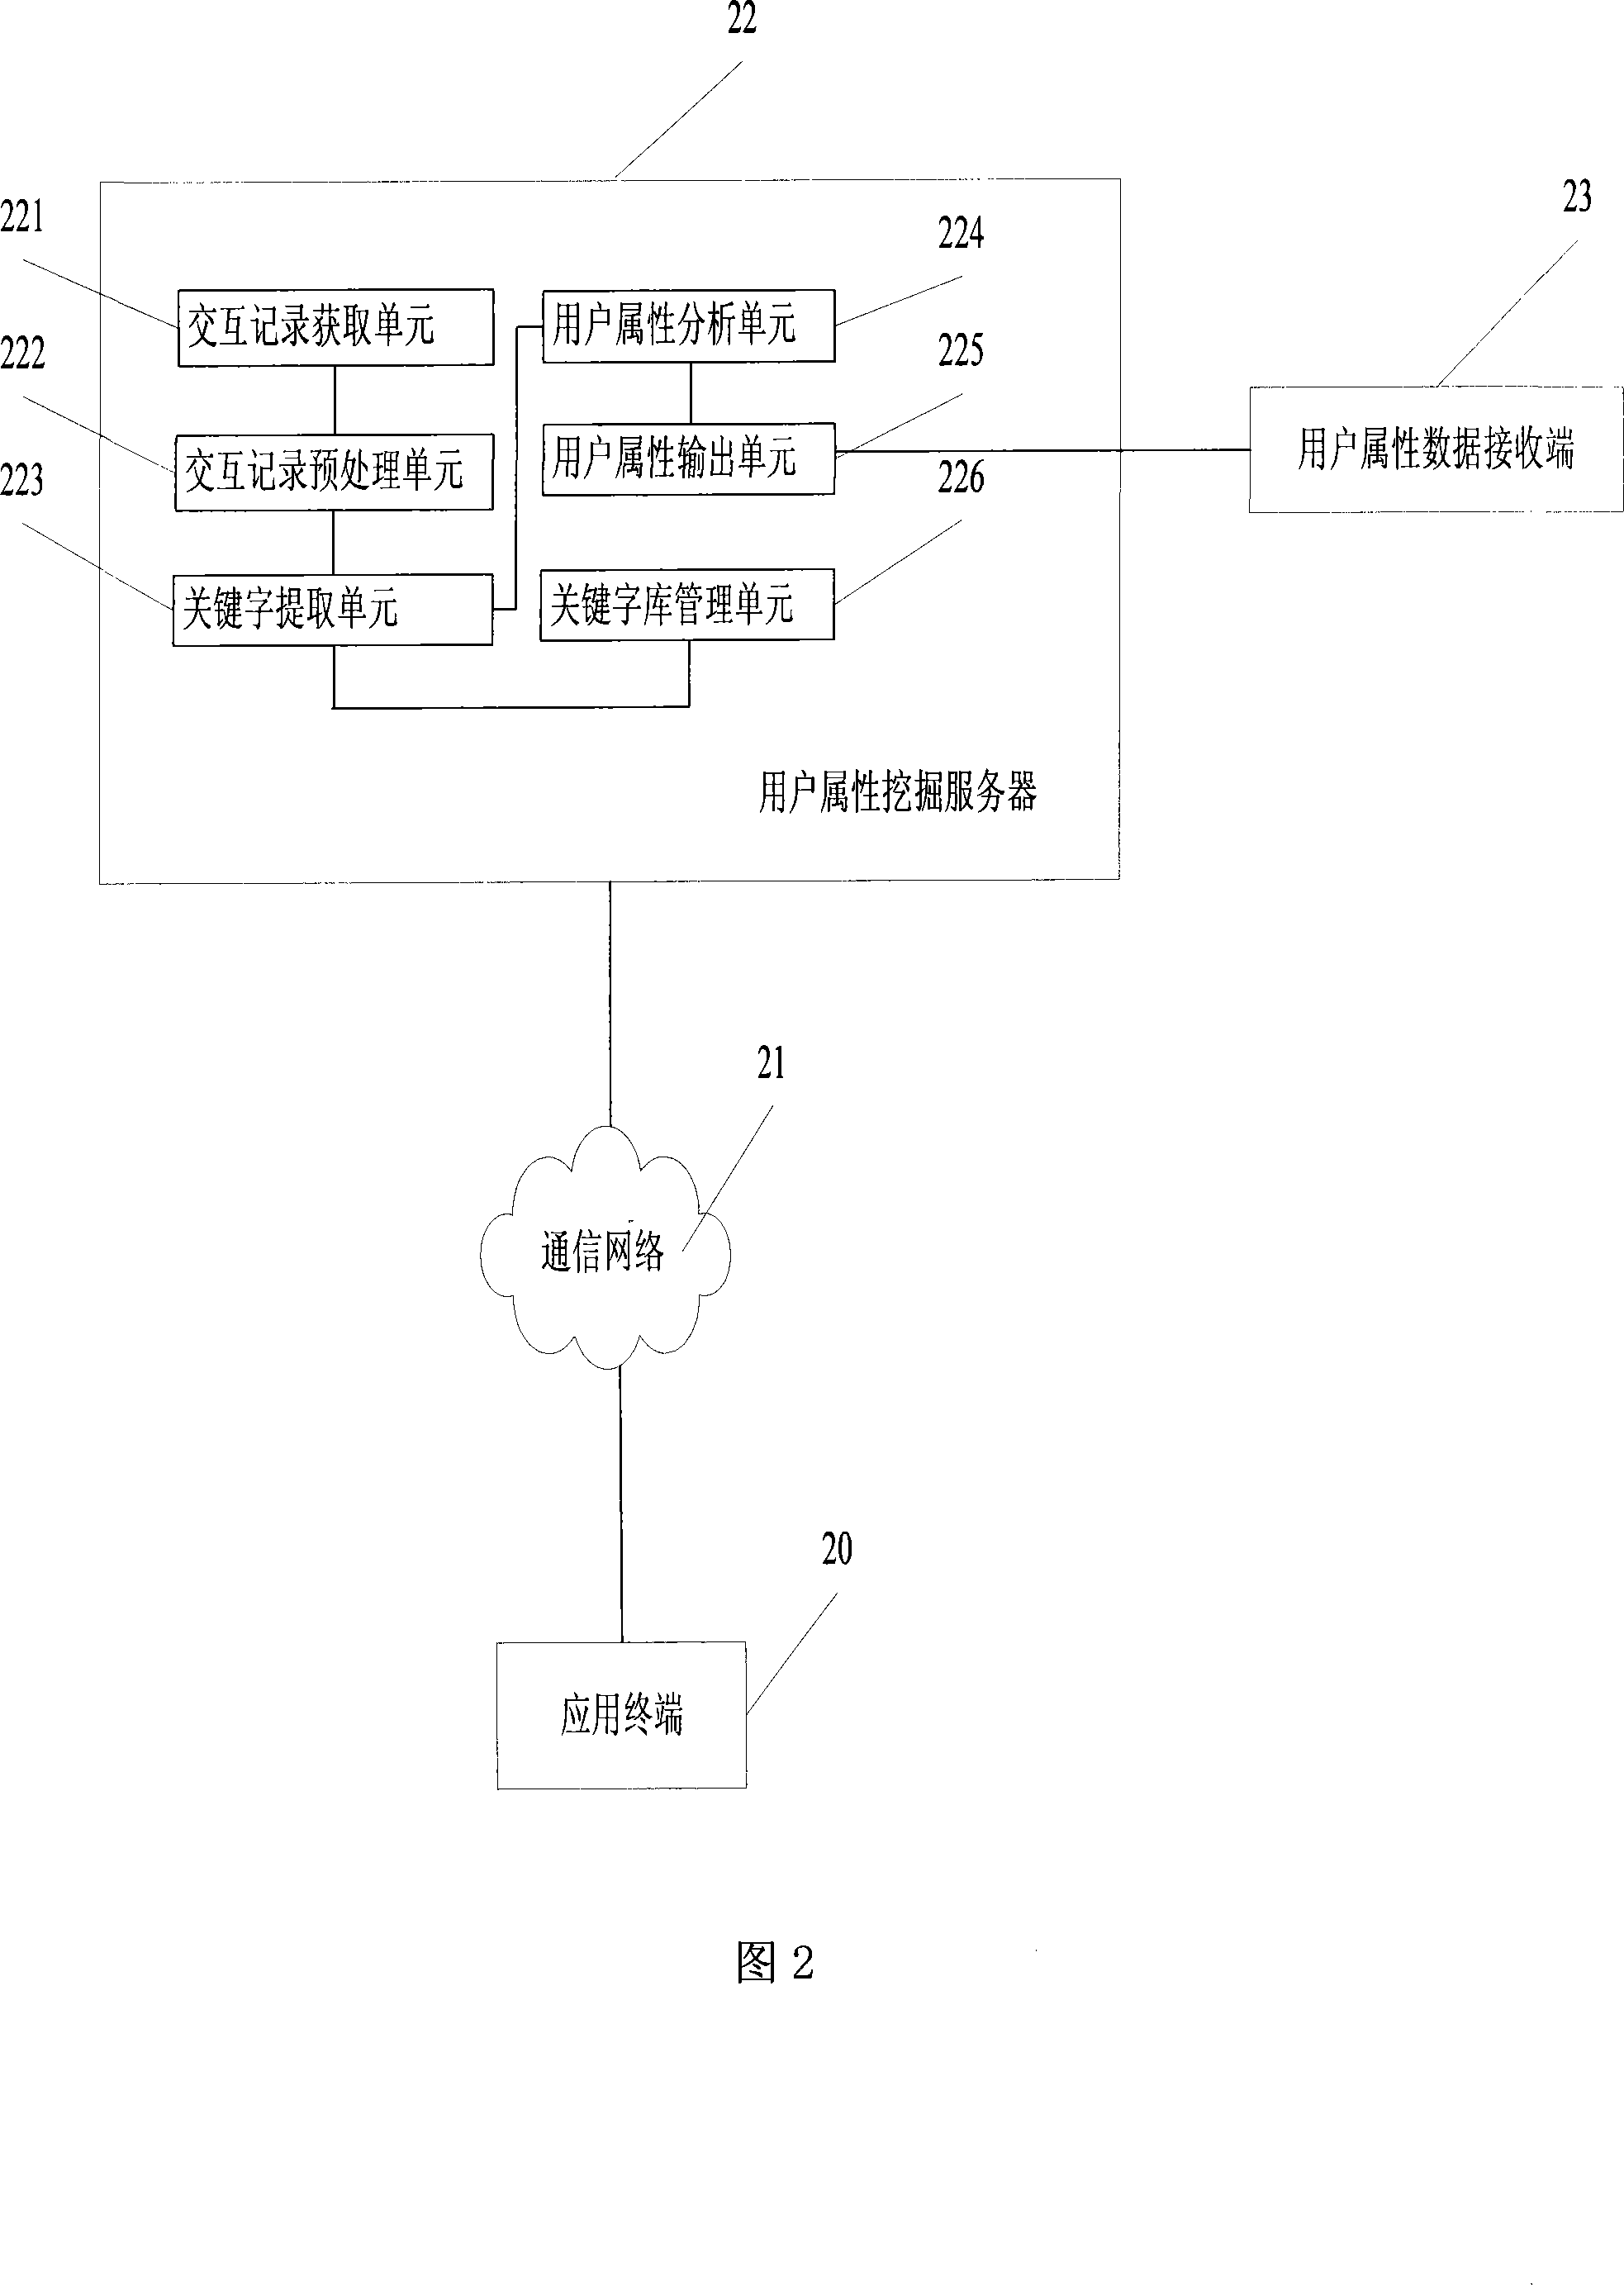 System and method for digging user attribute based on user interactive records